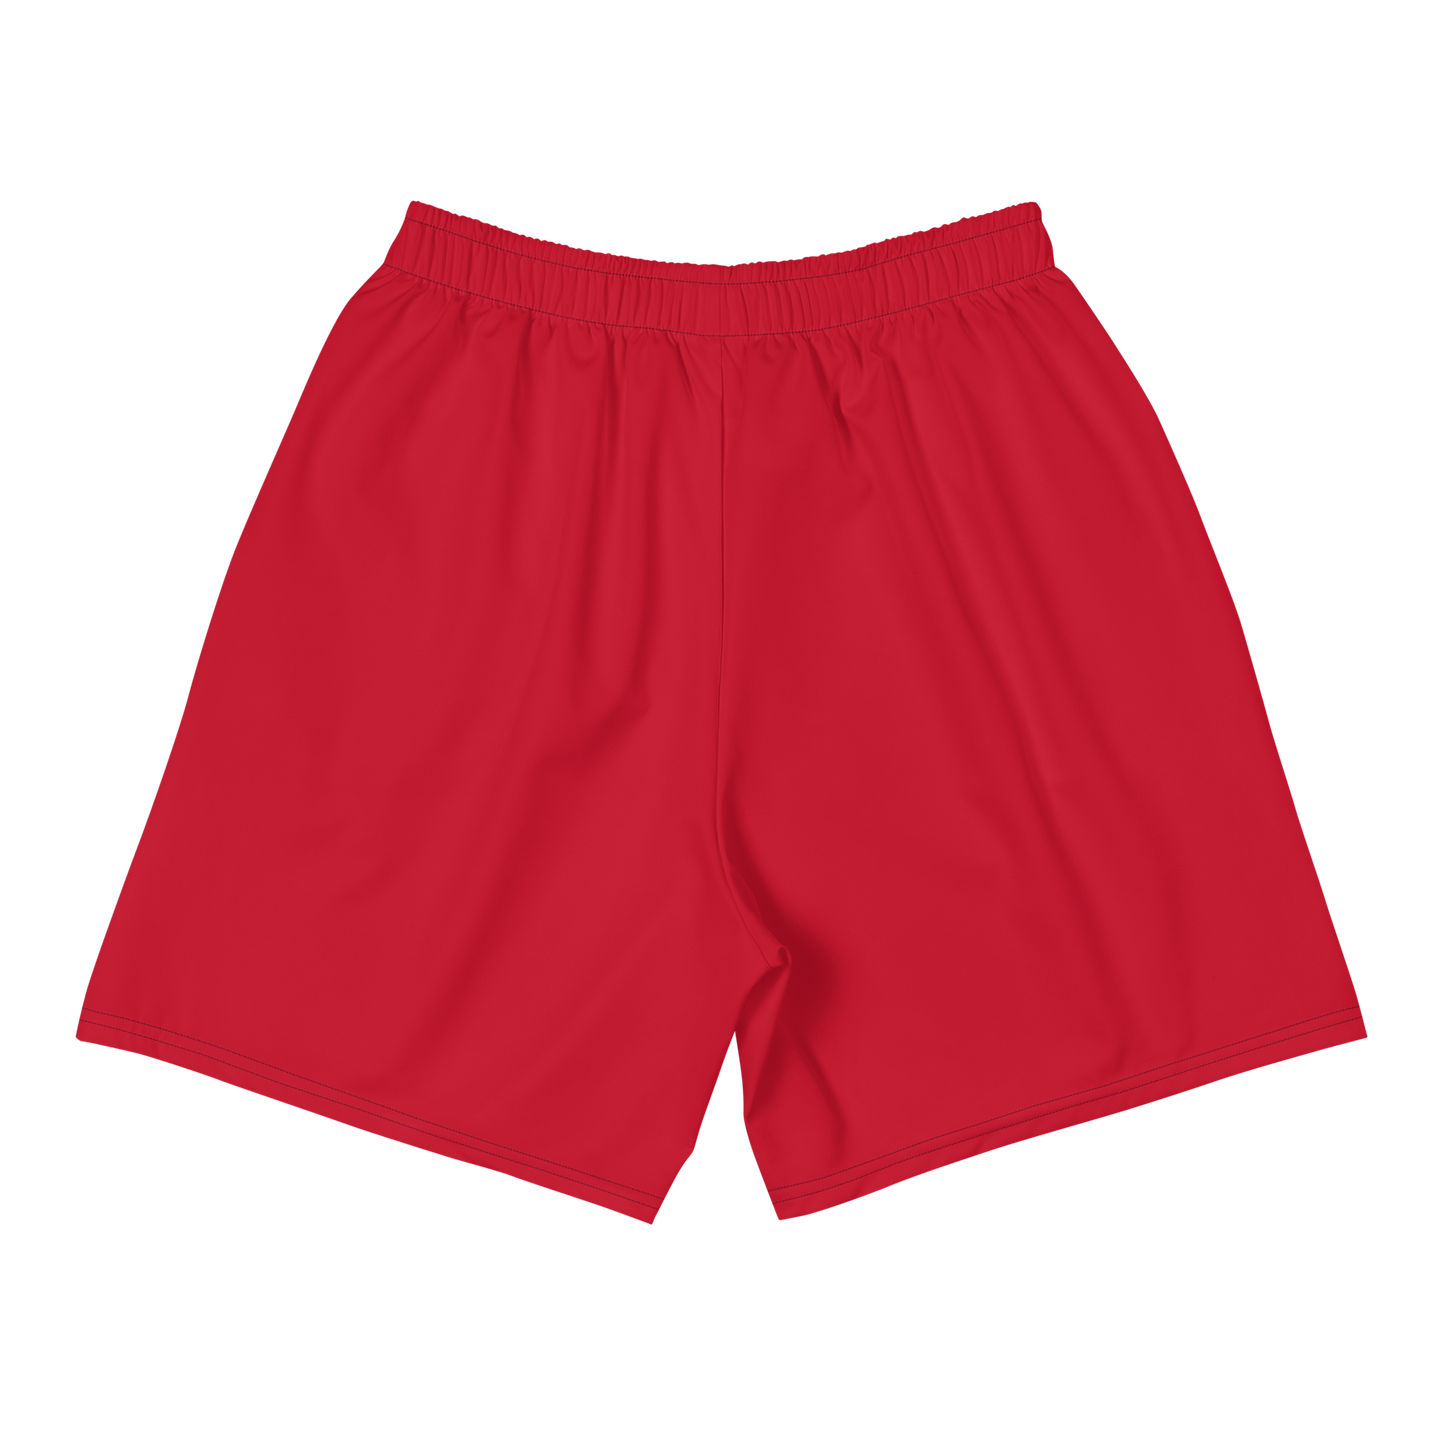 DWMD 'Stained Red' Shorts